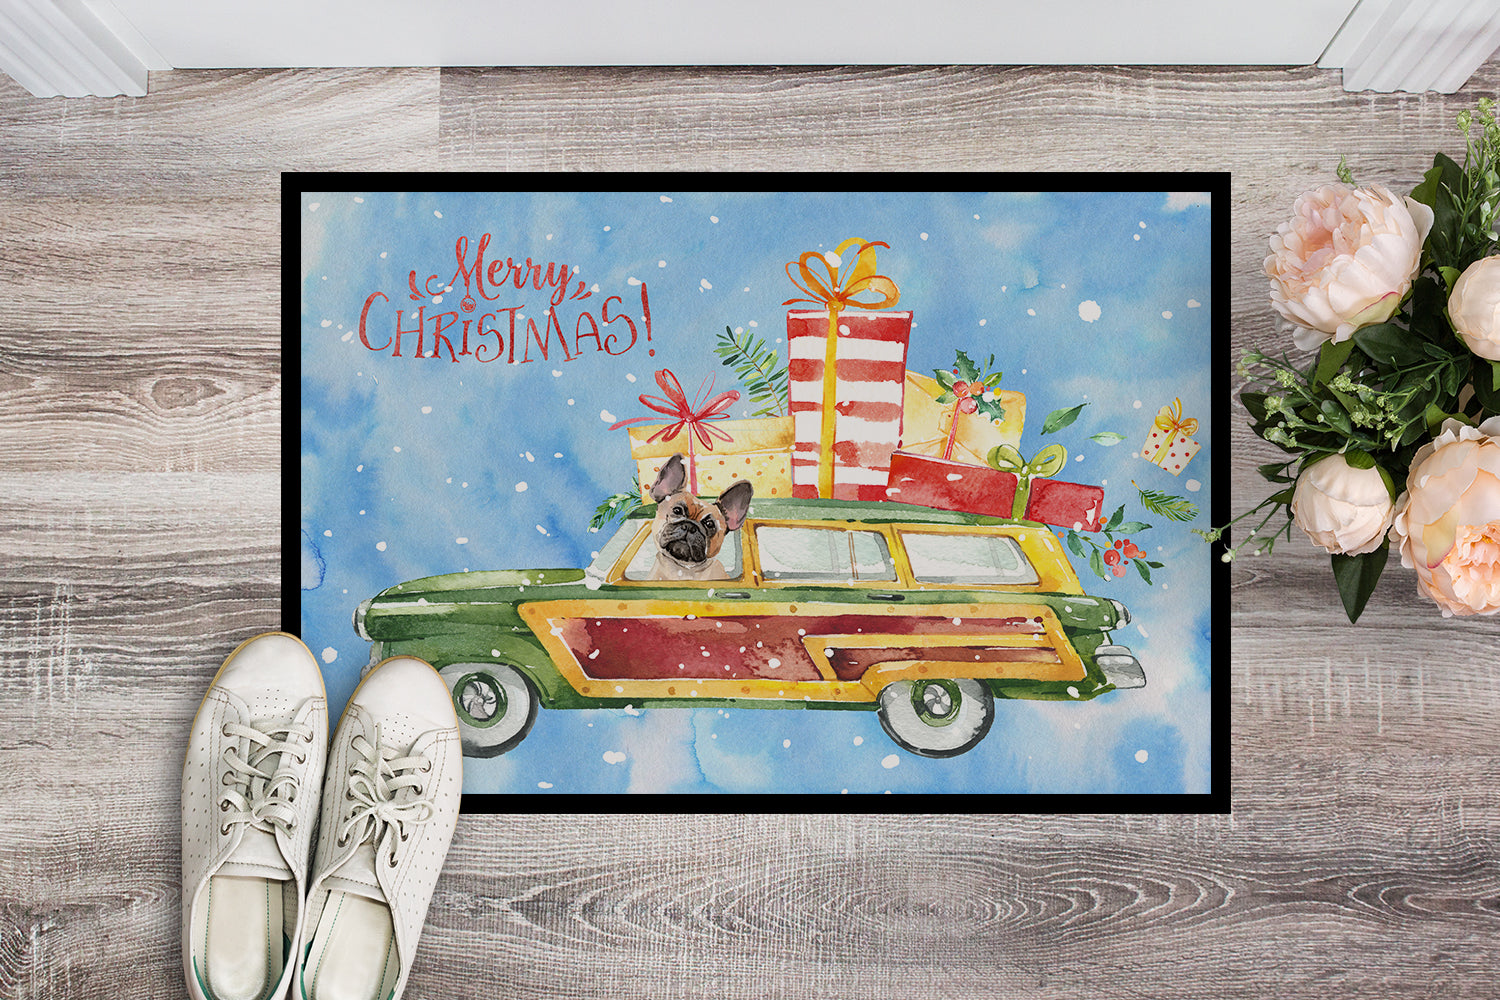 Merry Christmas Fawn French Bulldog Indoor or Outdoor Mat 18x27 CK2454MAT - the-store.com